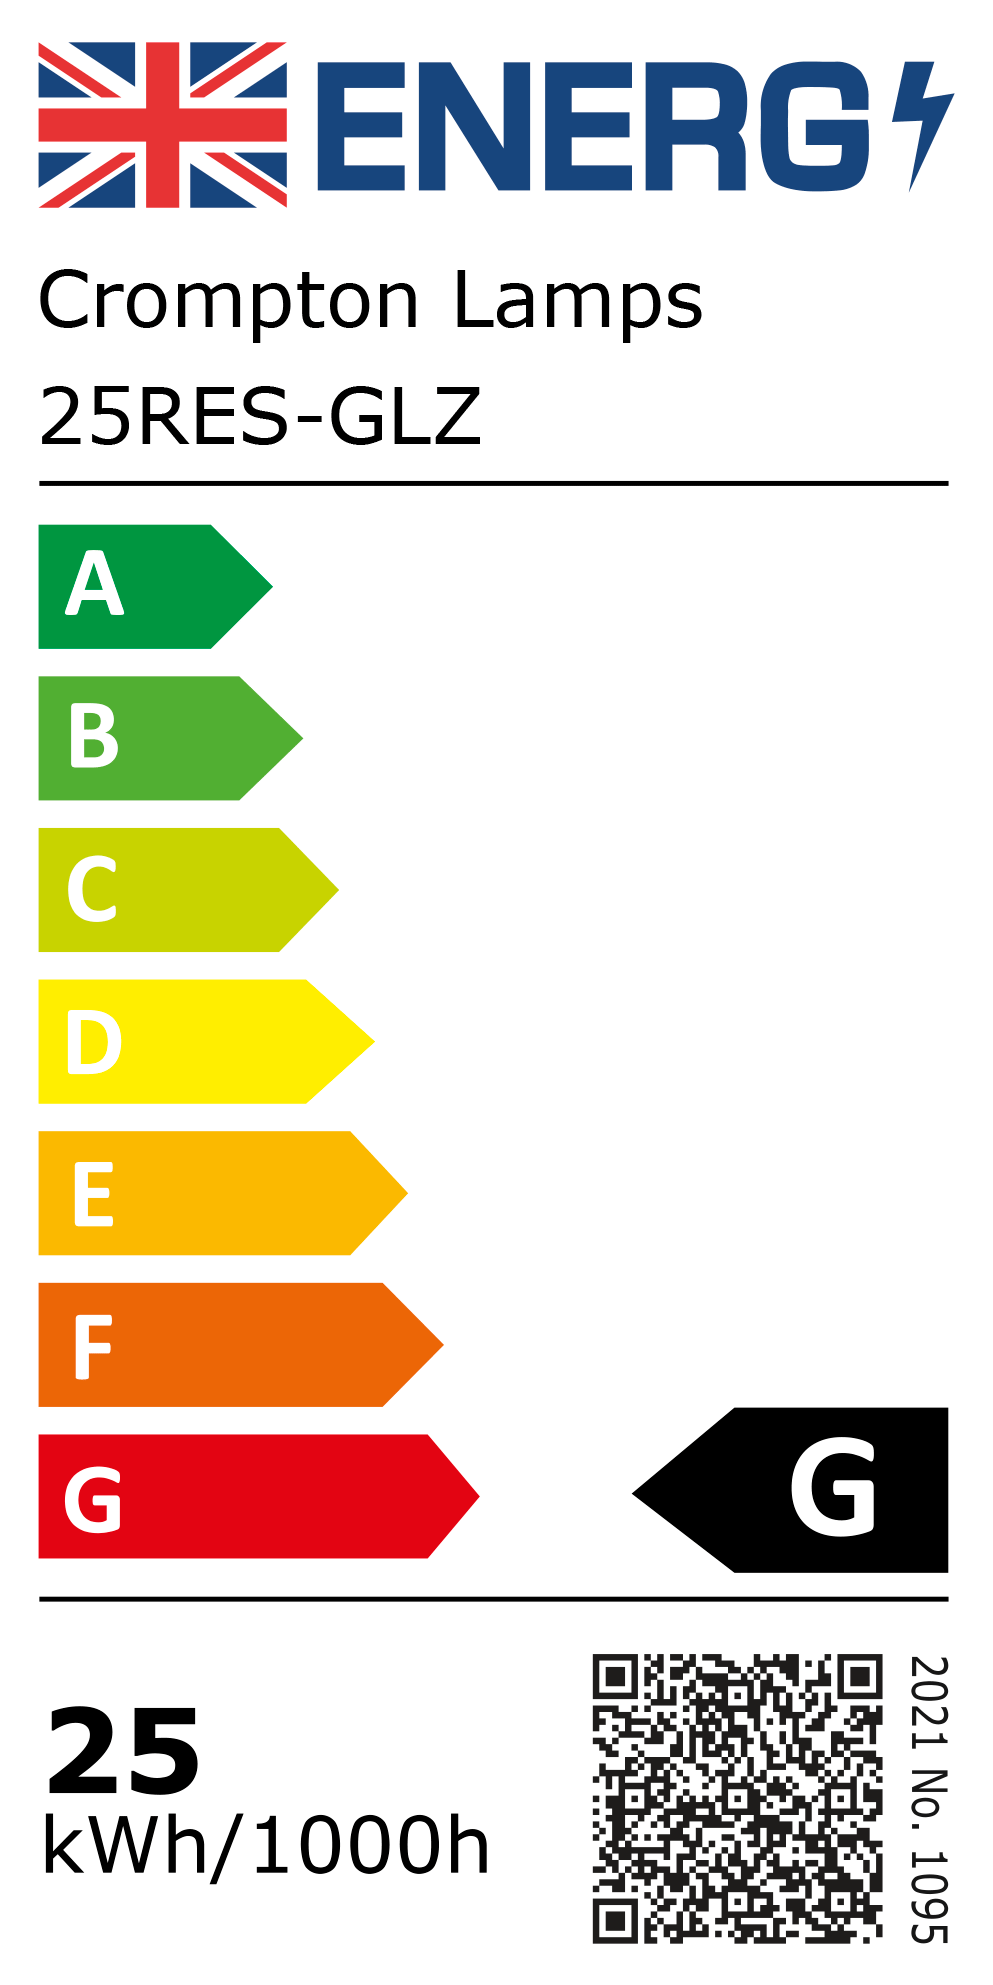 New 2021 Energy Rating Label: Stock Code 25RES-GLZ